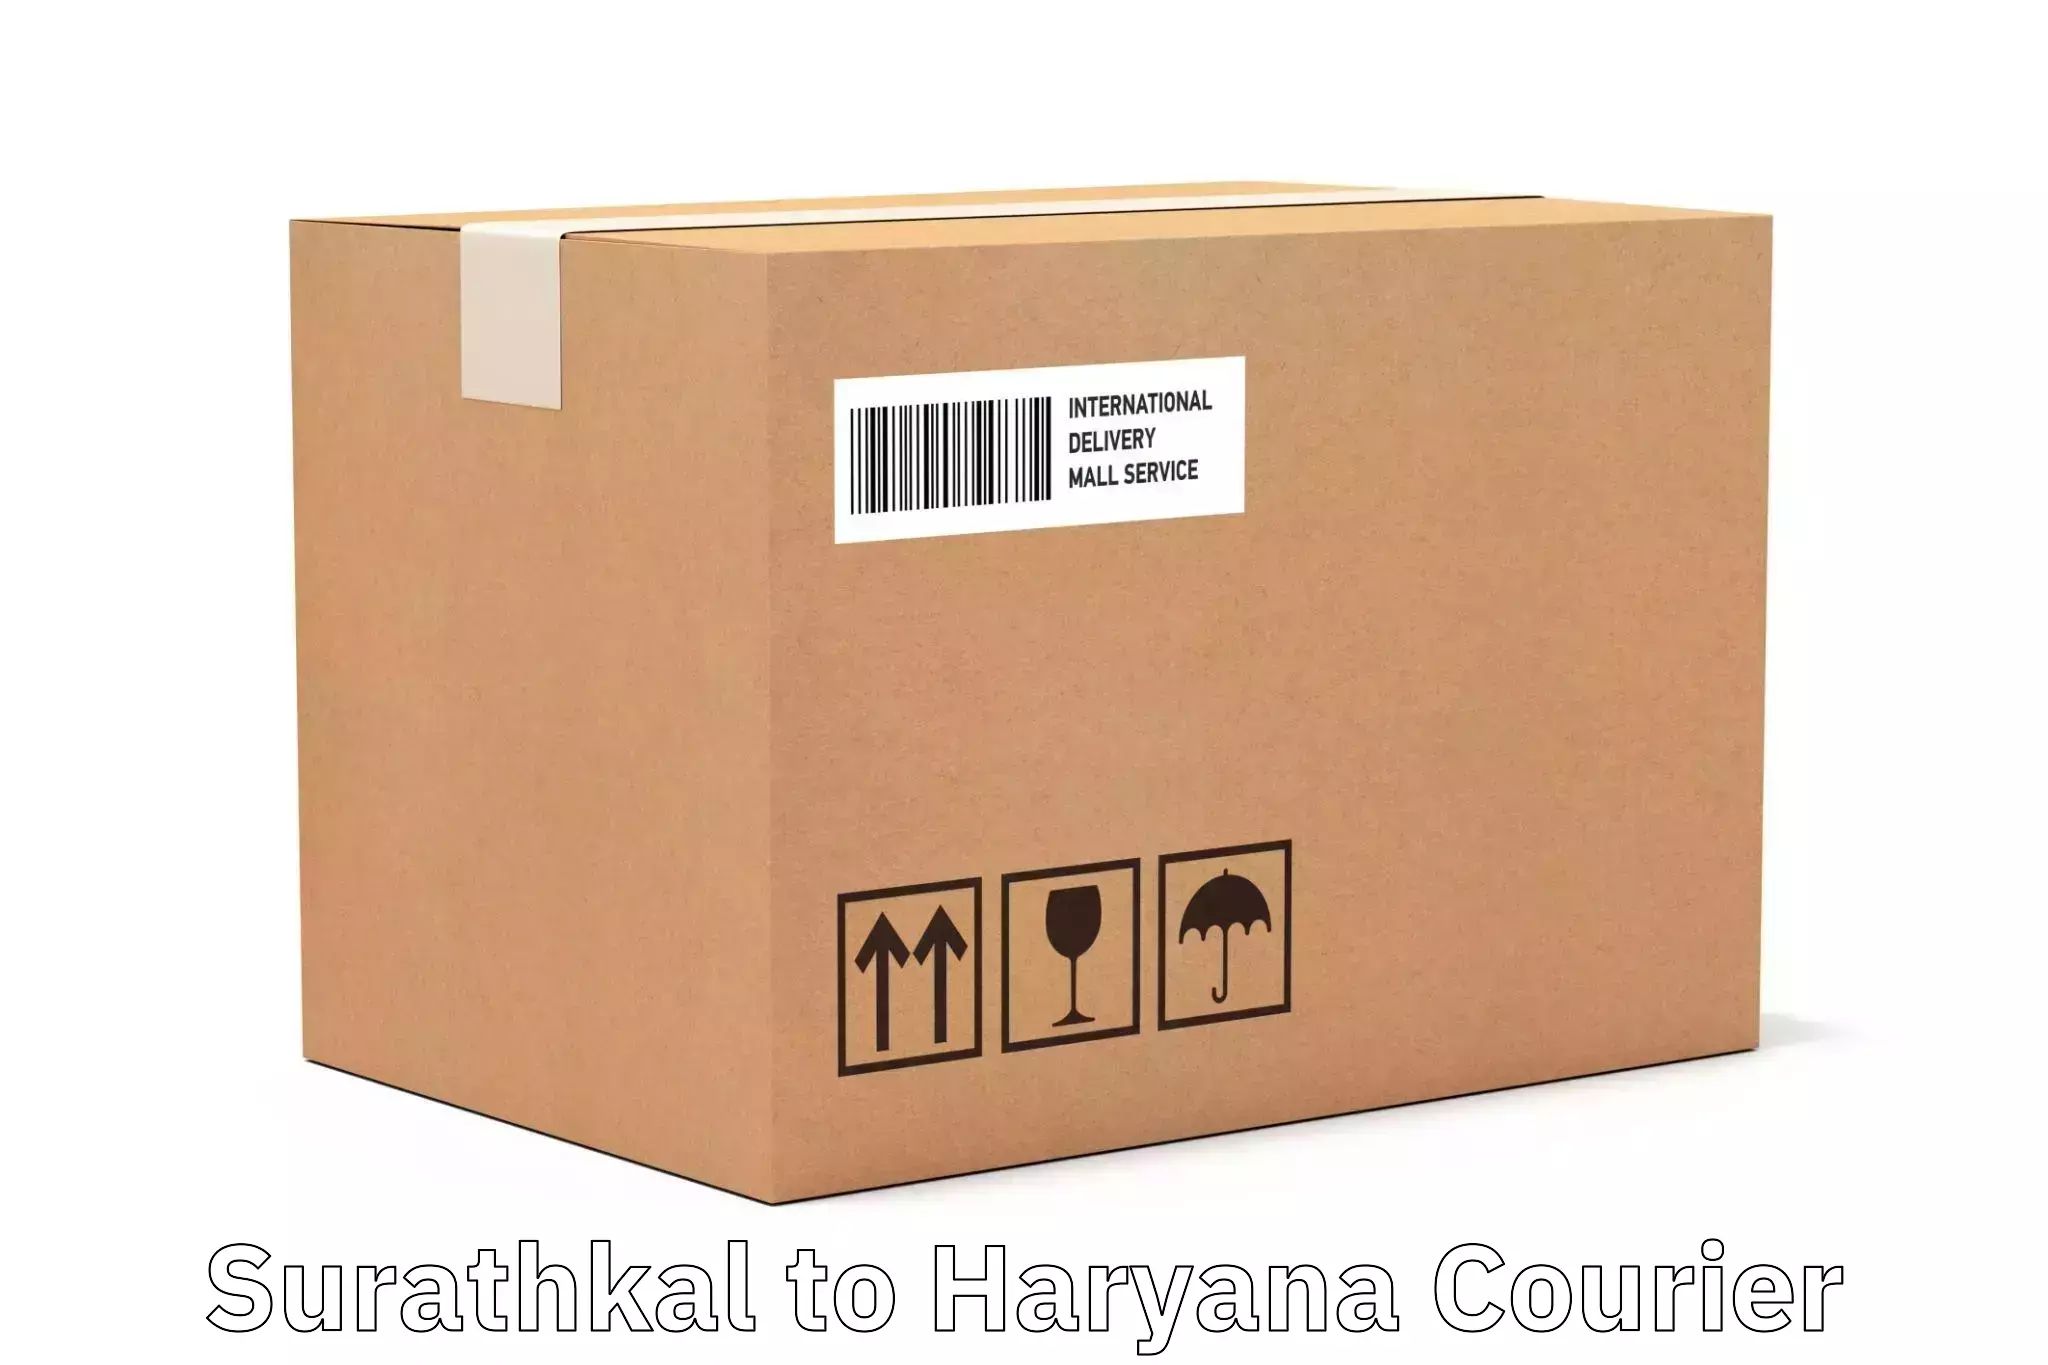 Cash on delivery service Surathkal to Haryana